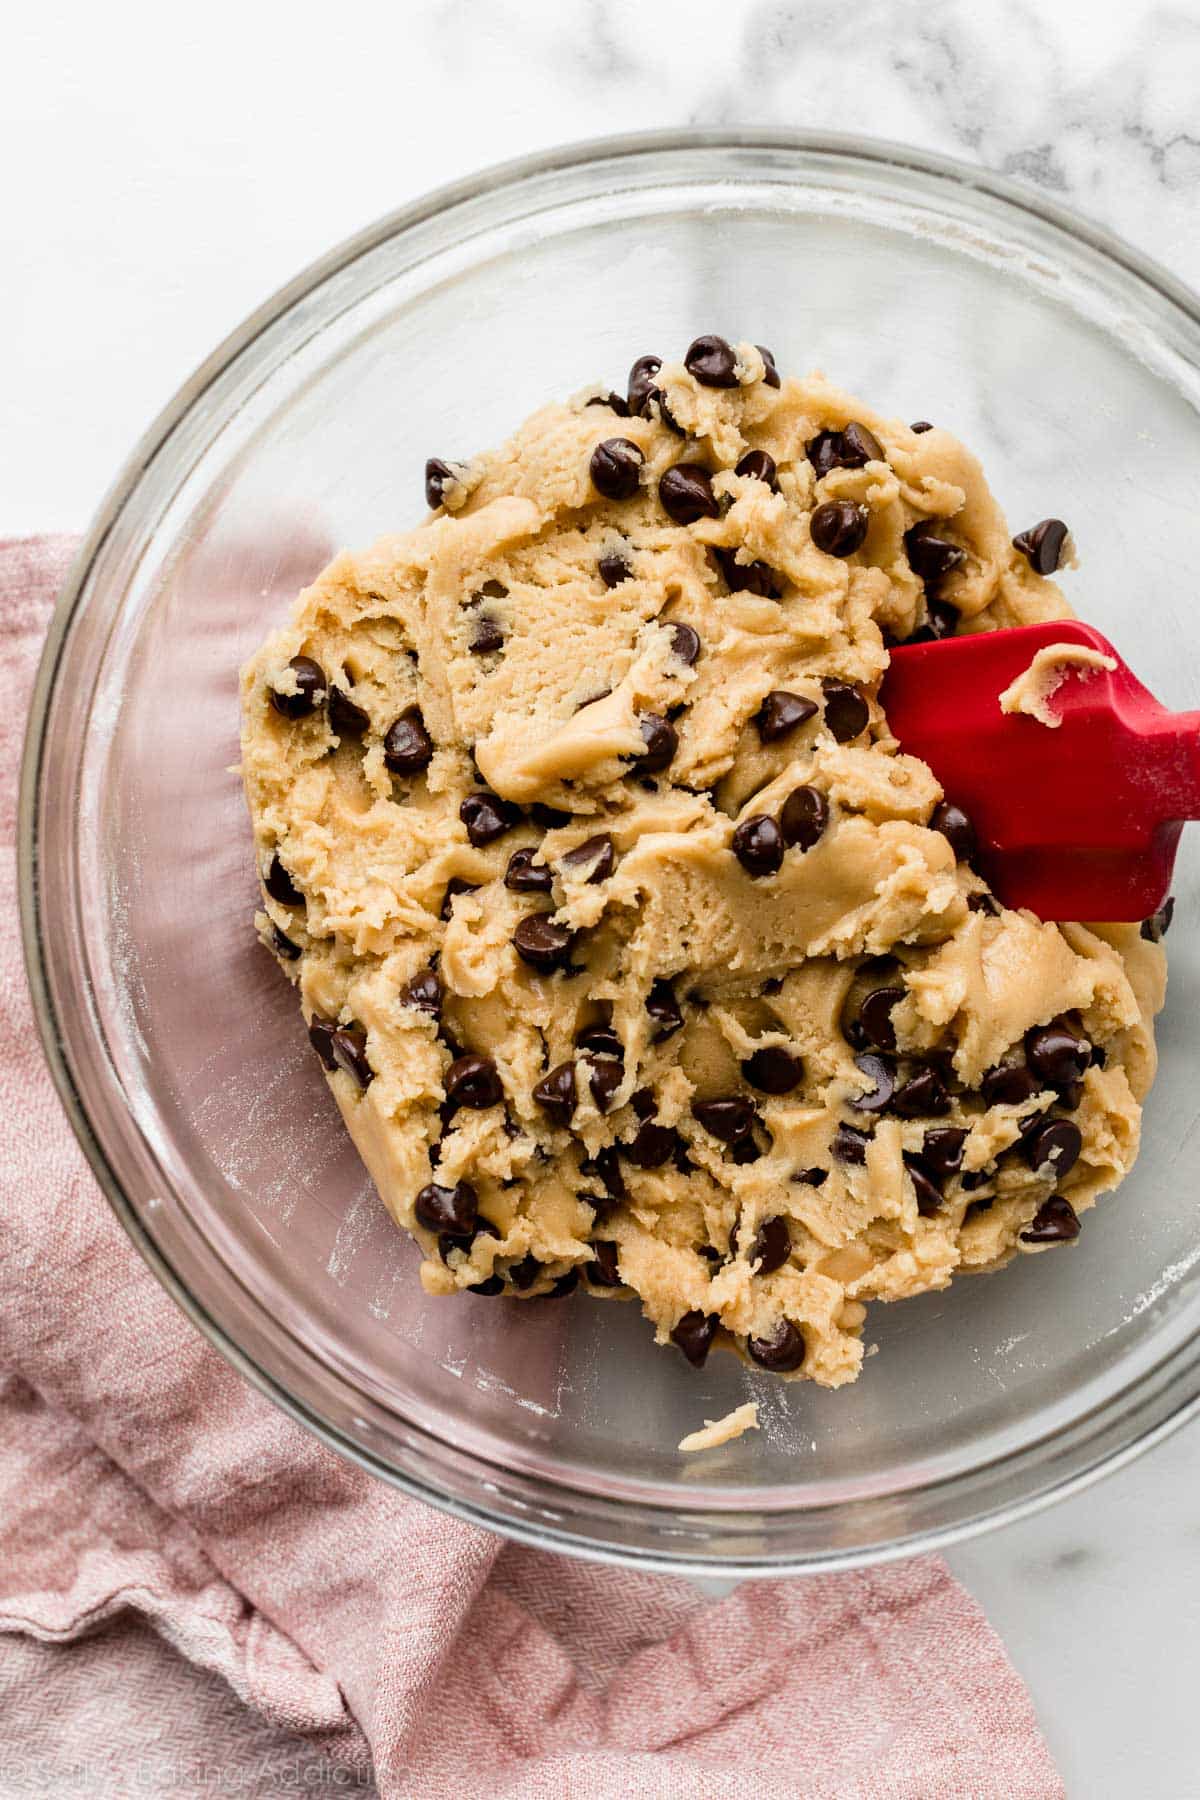 Chocolate chip cookie dough in a glass bowl